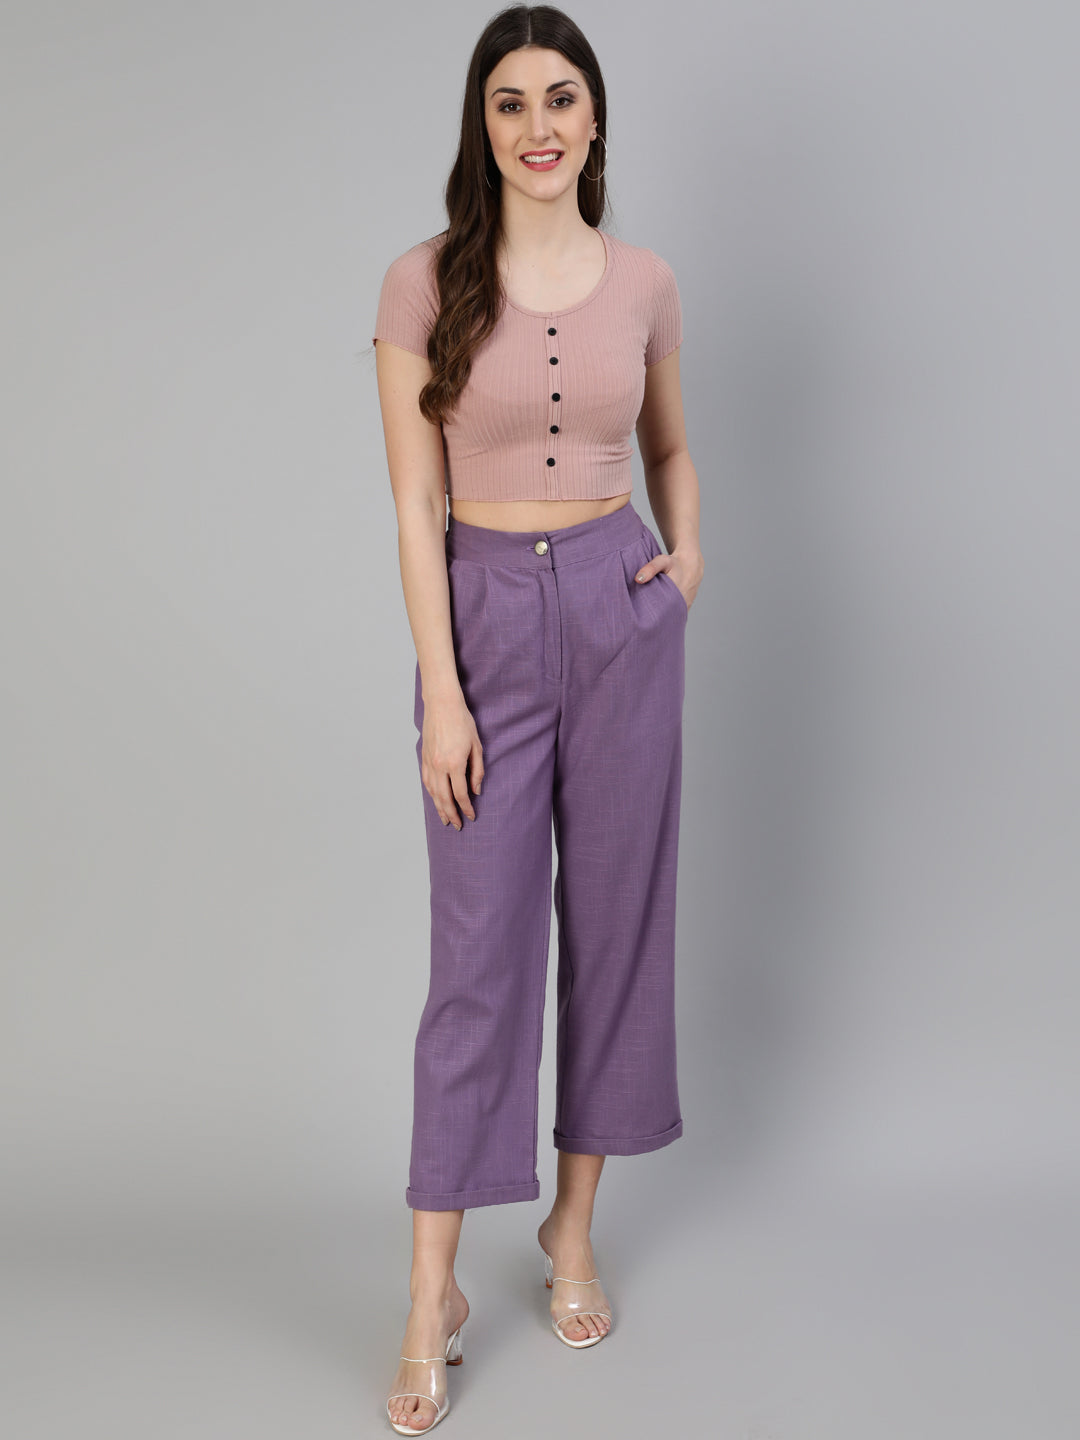 Get ankle Length Pants for Women